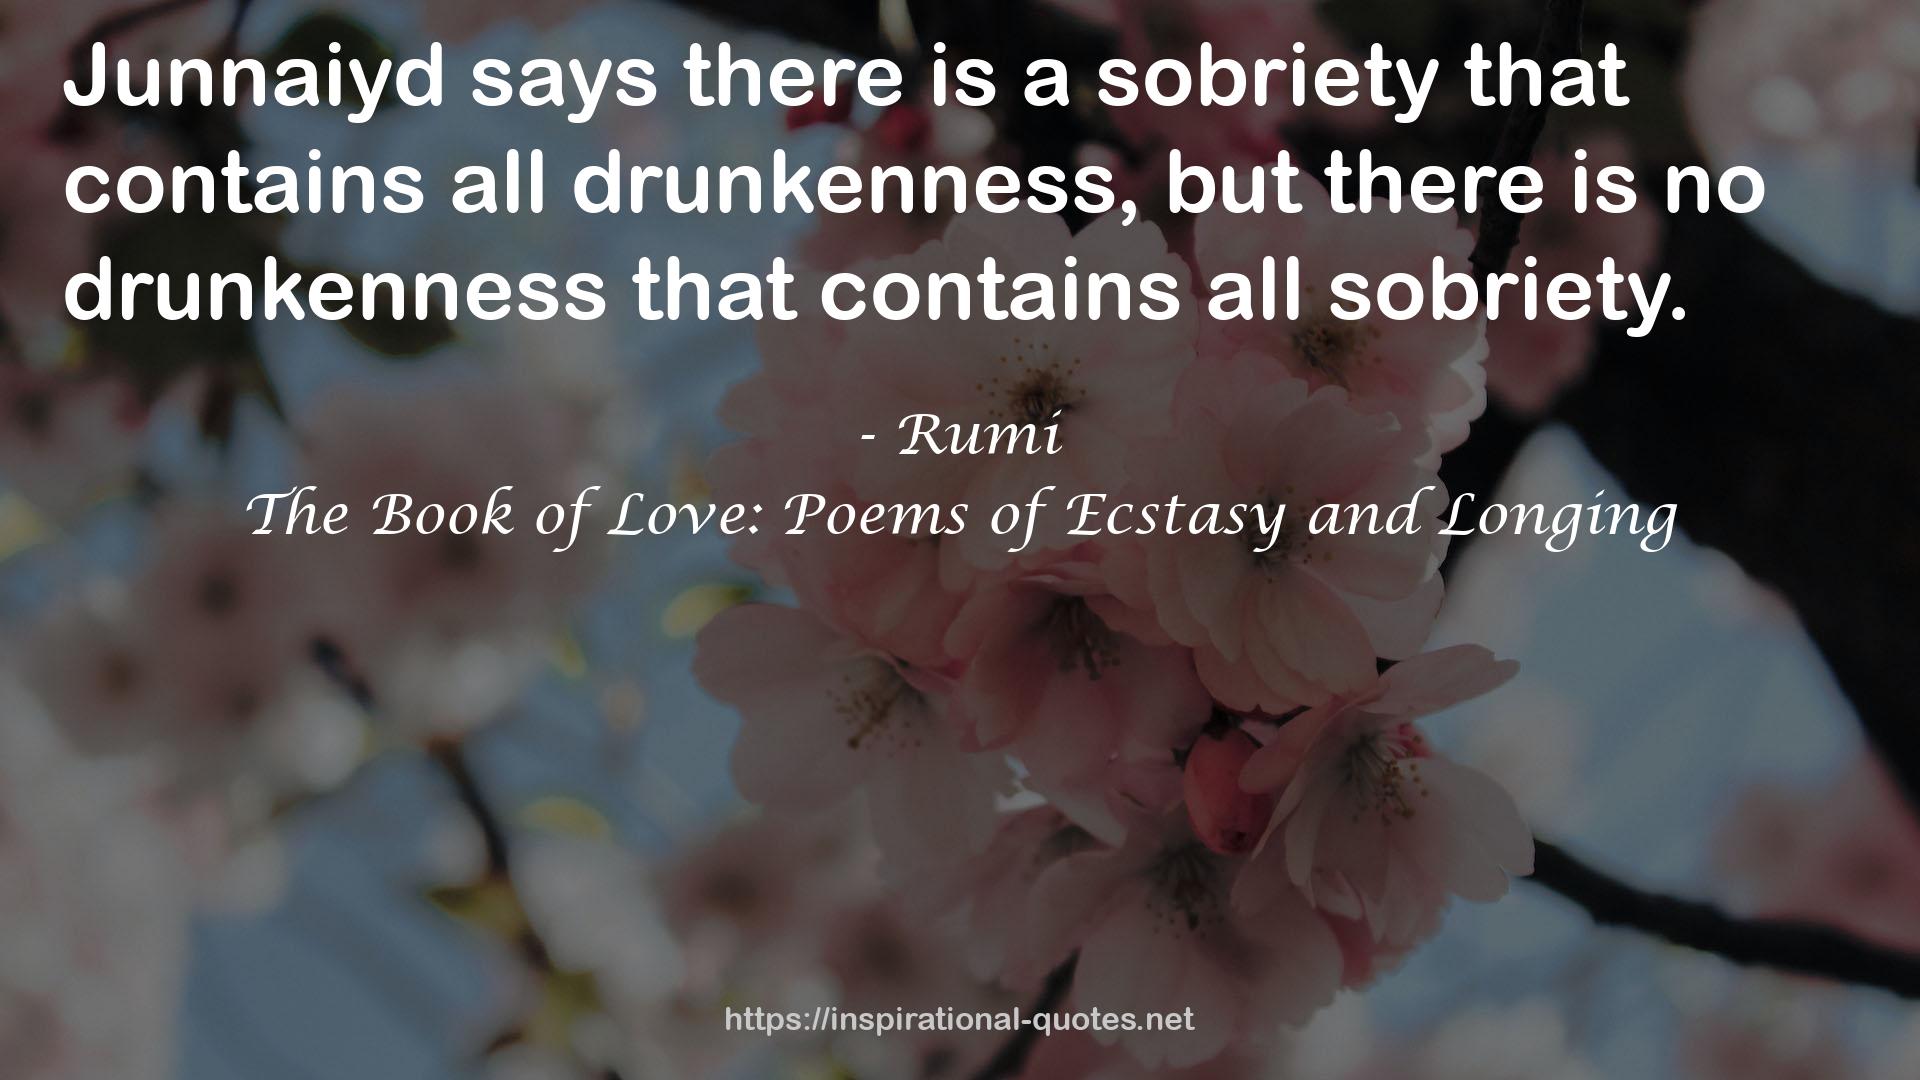 The Book of Love: Poems of Ecstasy and Longing QUOTES